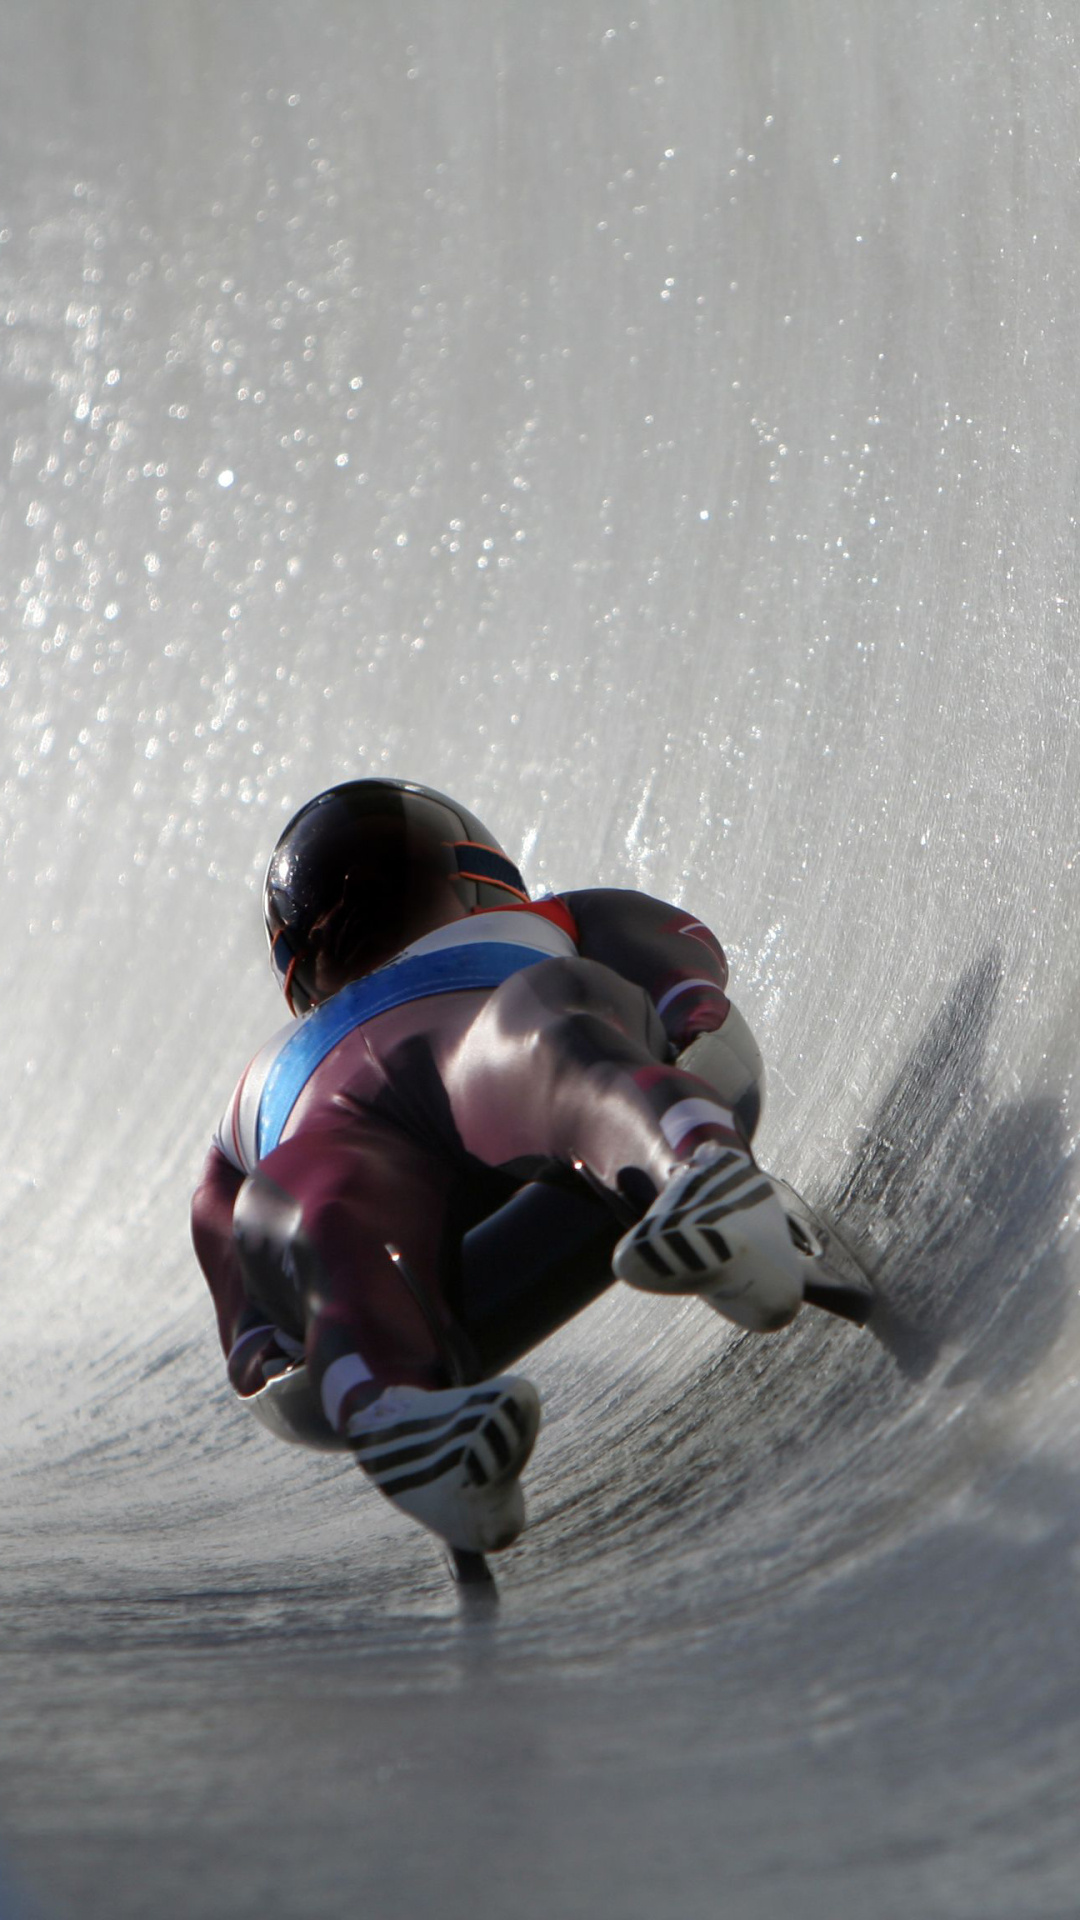 Luge: An official Winter Olympics sports discipline, Extreme bobsled sport. 1080x1920 Full HD Background.